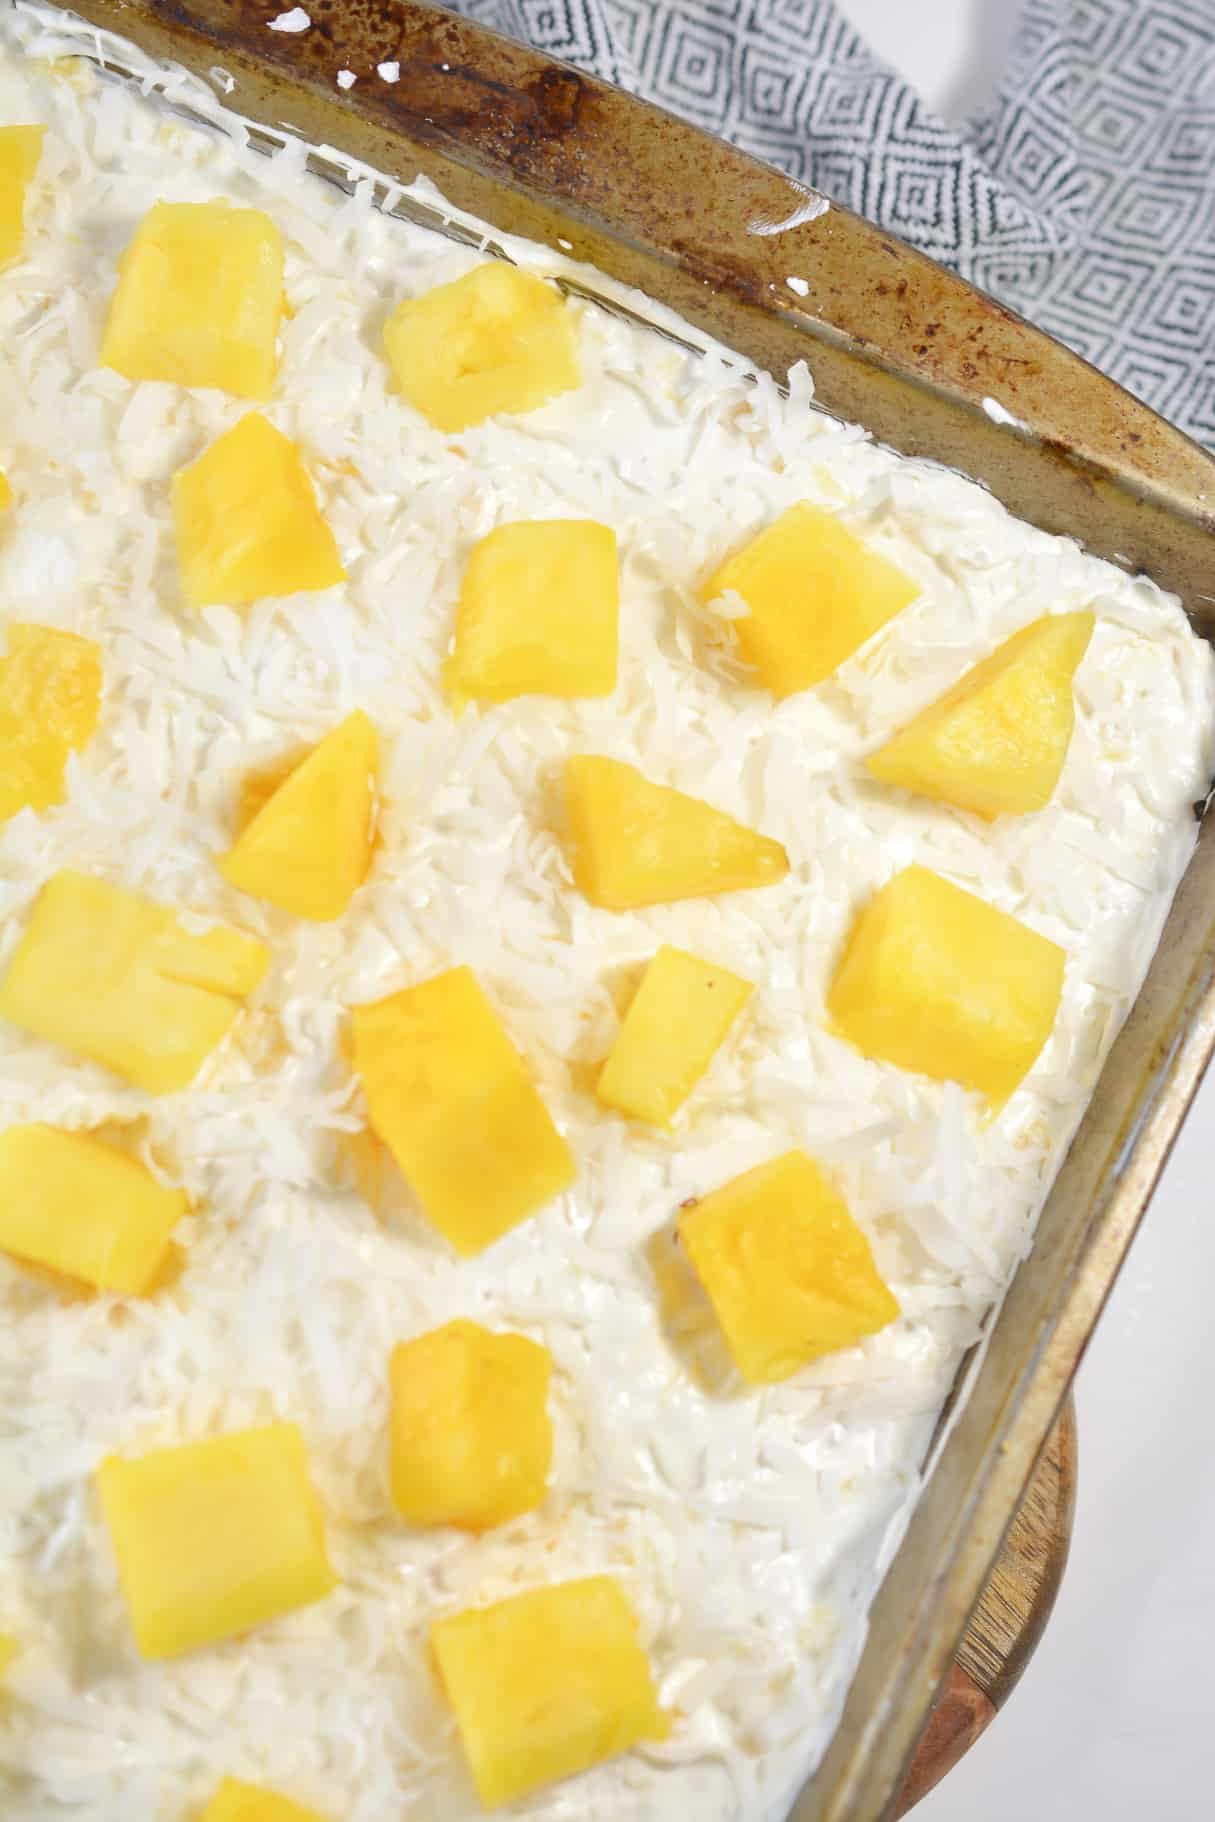 Top with shredded coconut and pineapple chunks for garnish.